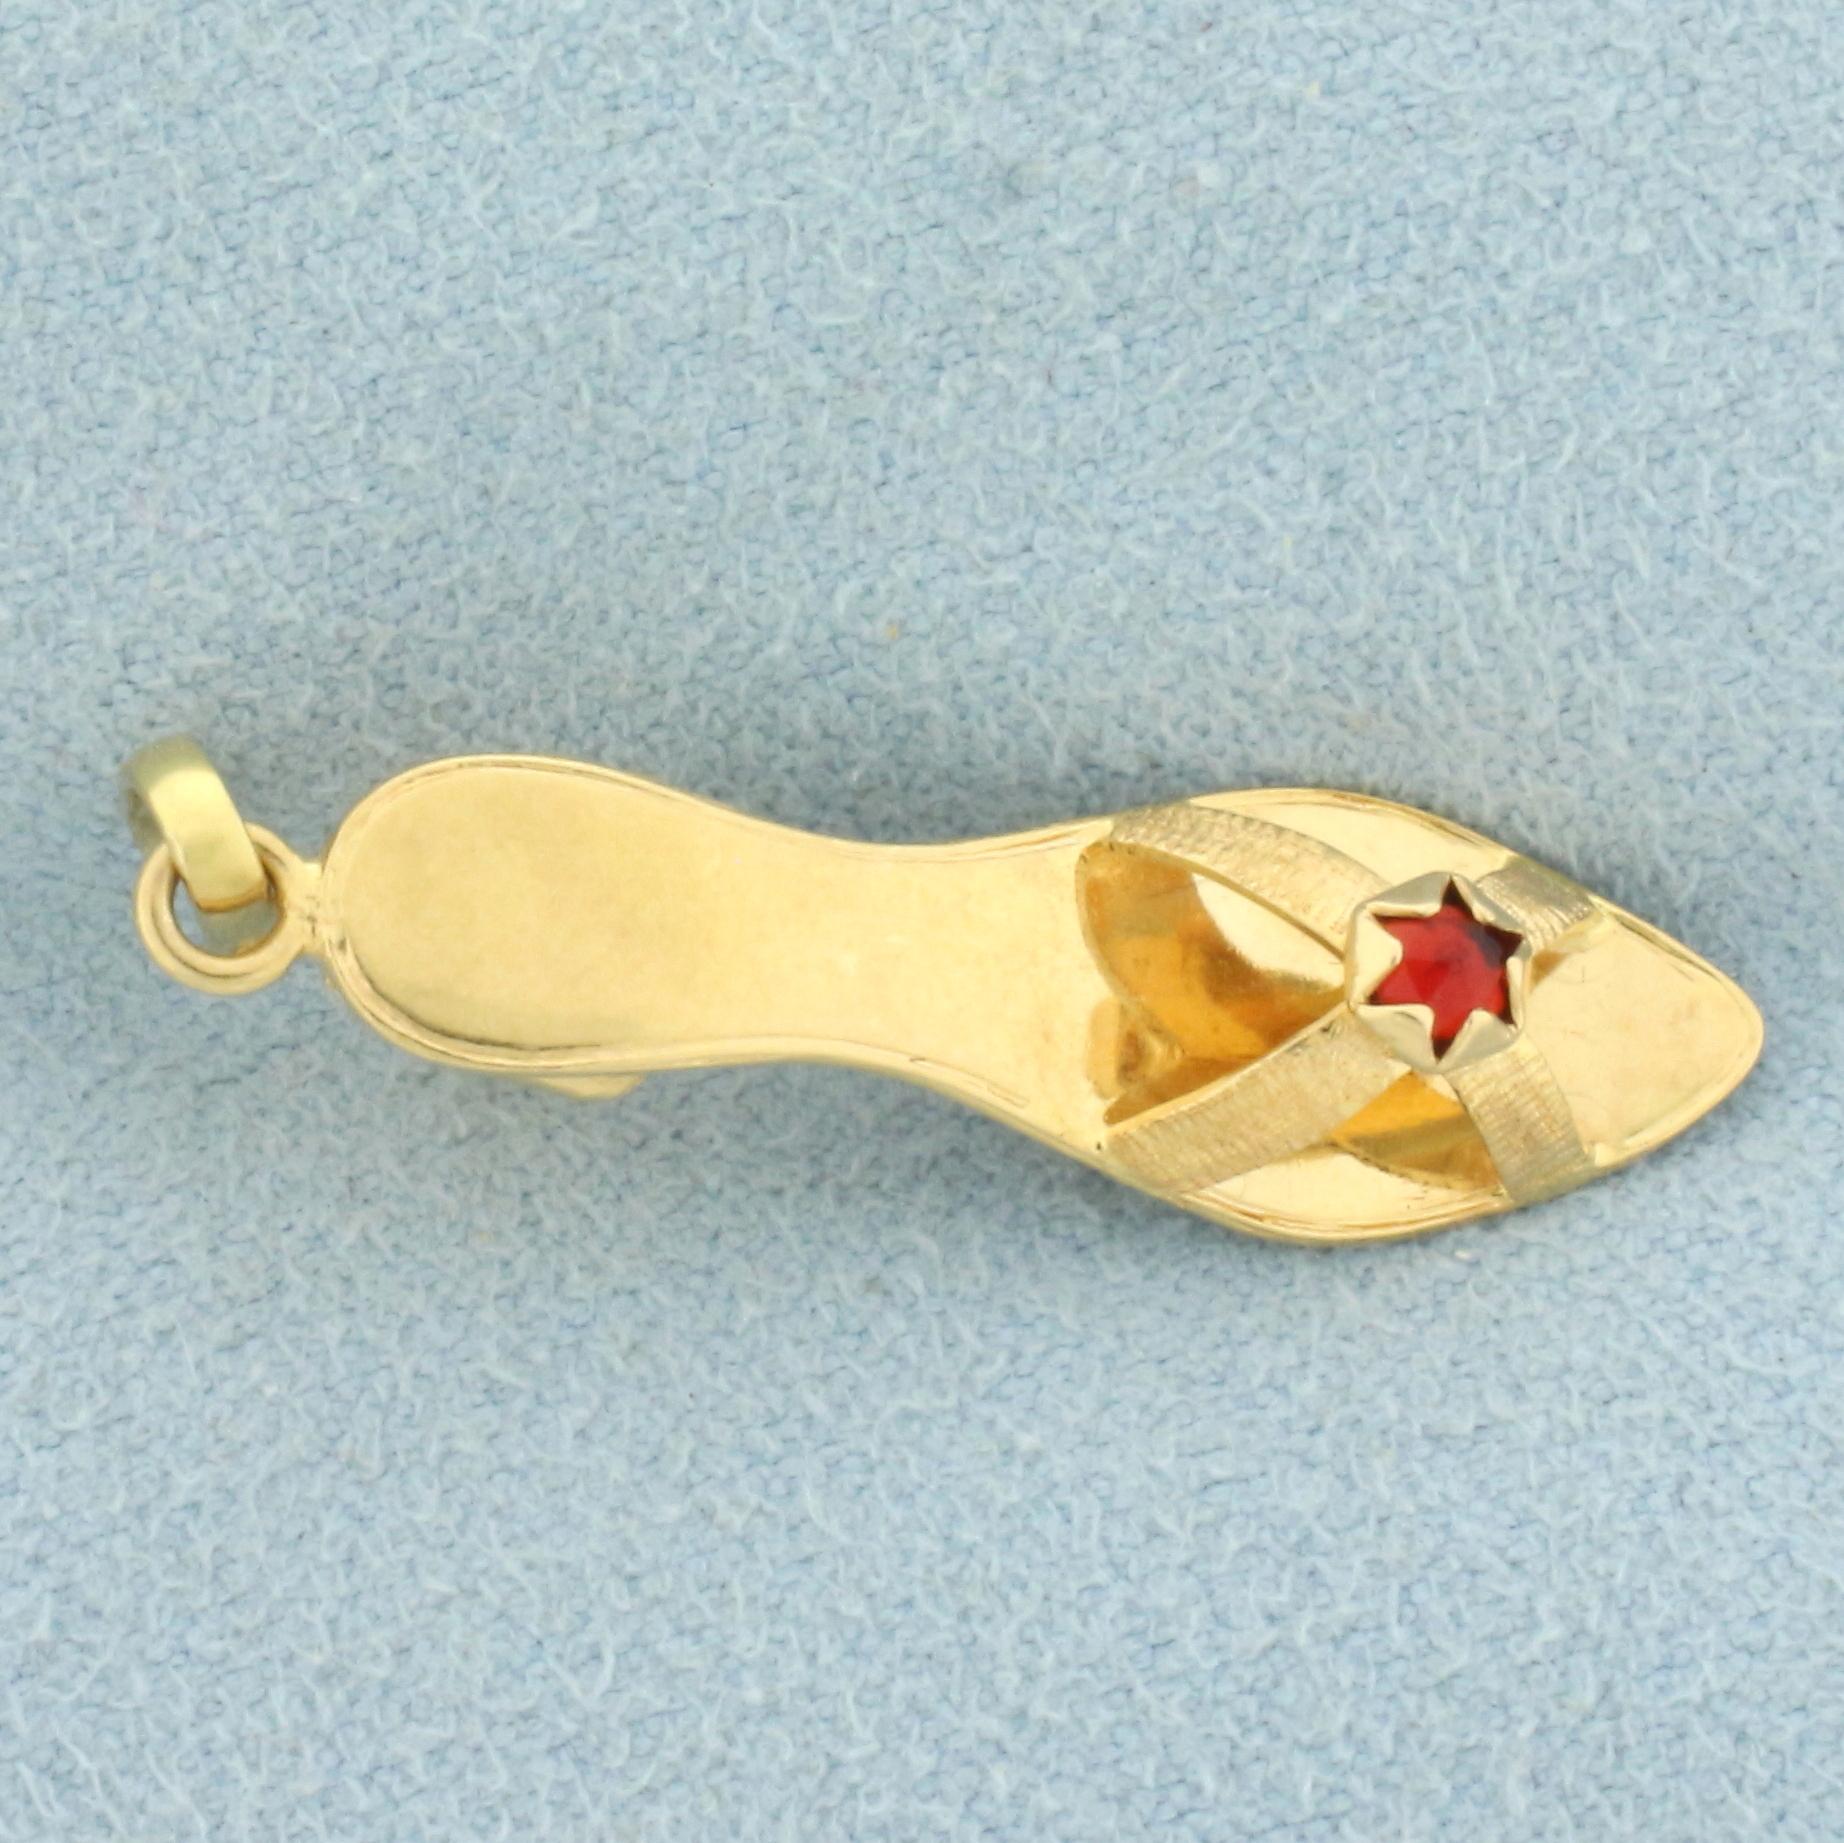 Ruby High Heel Shoe Charm Or Pendant In 18k Yellow Gold